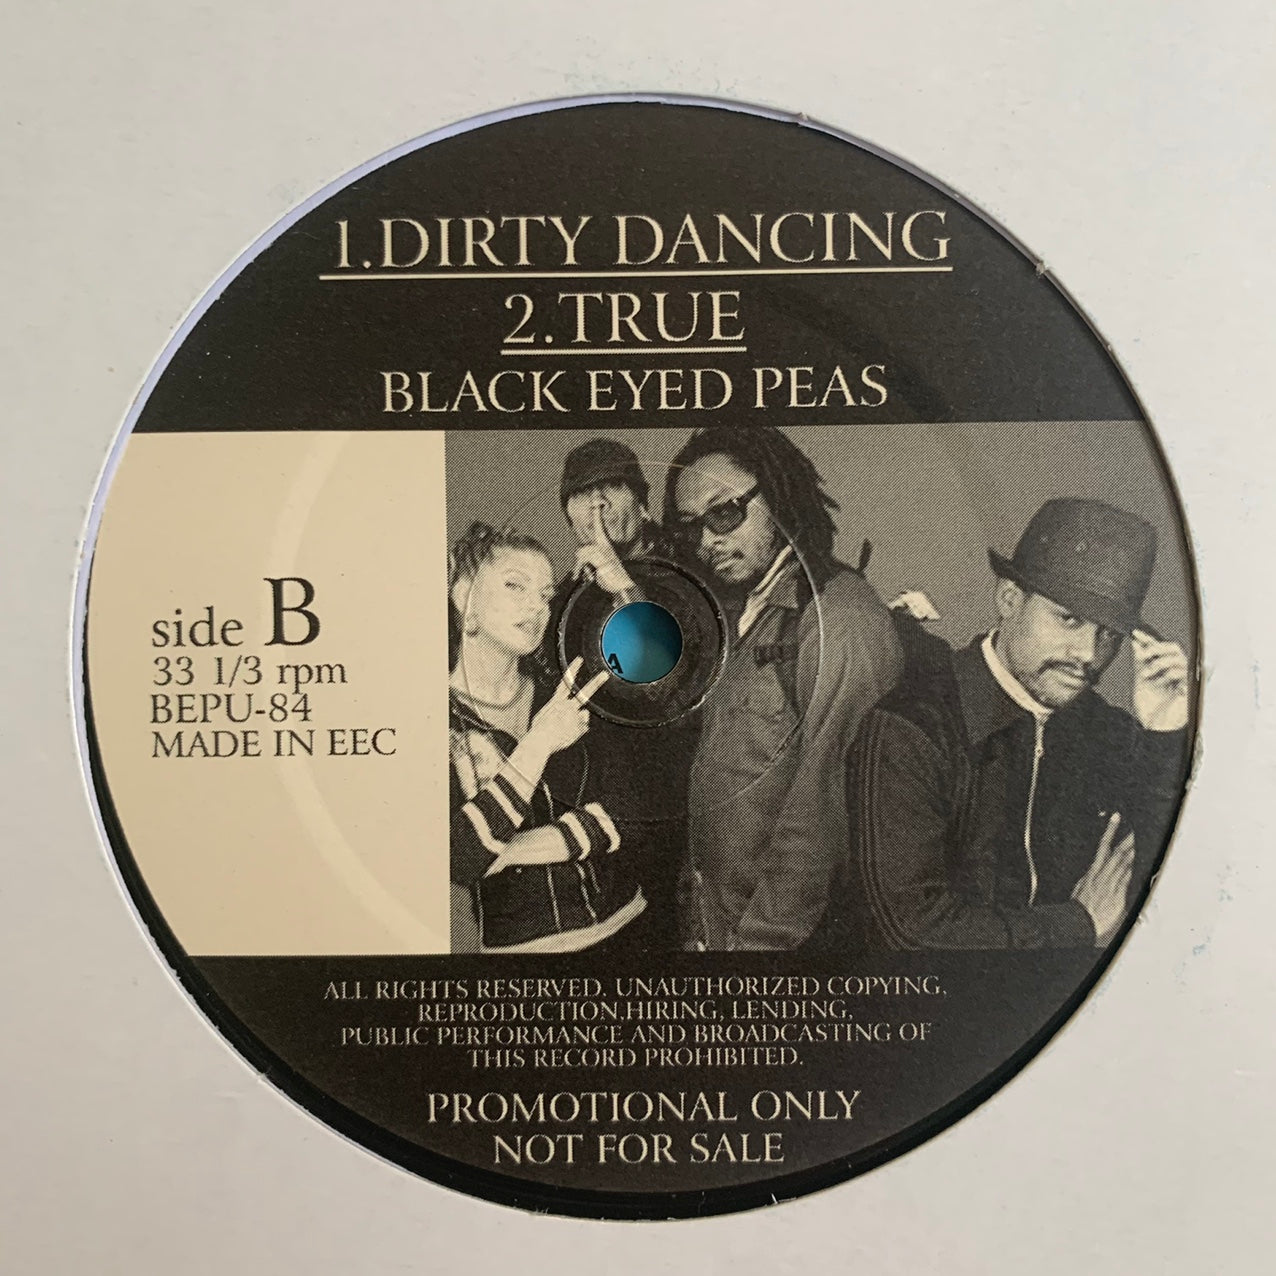 The Black Eyed Peas Feat Sting “Union” / “Dirty Dancing” 3 Track 12inch Vinyl